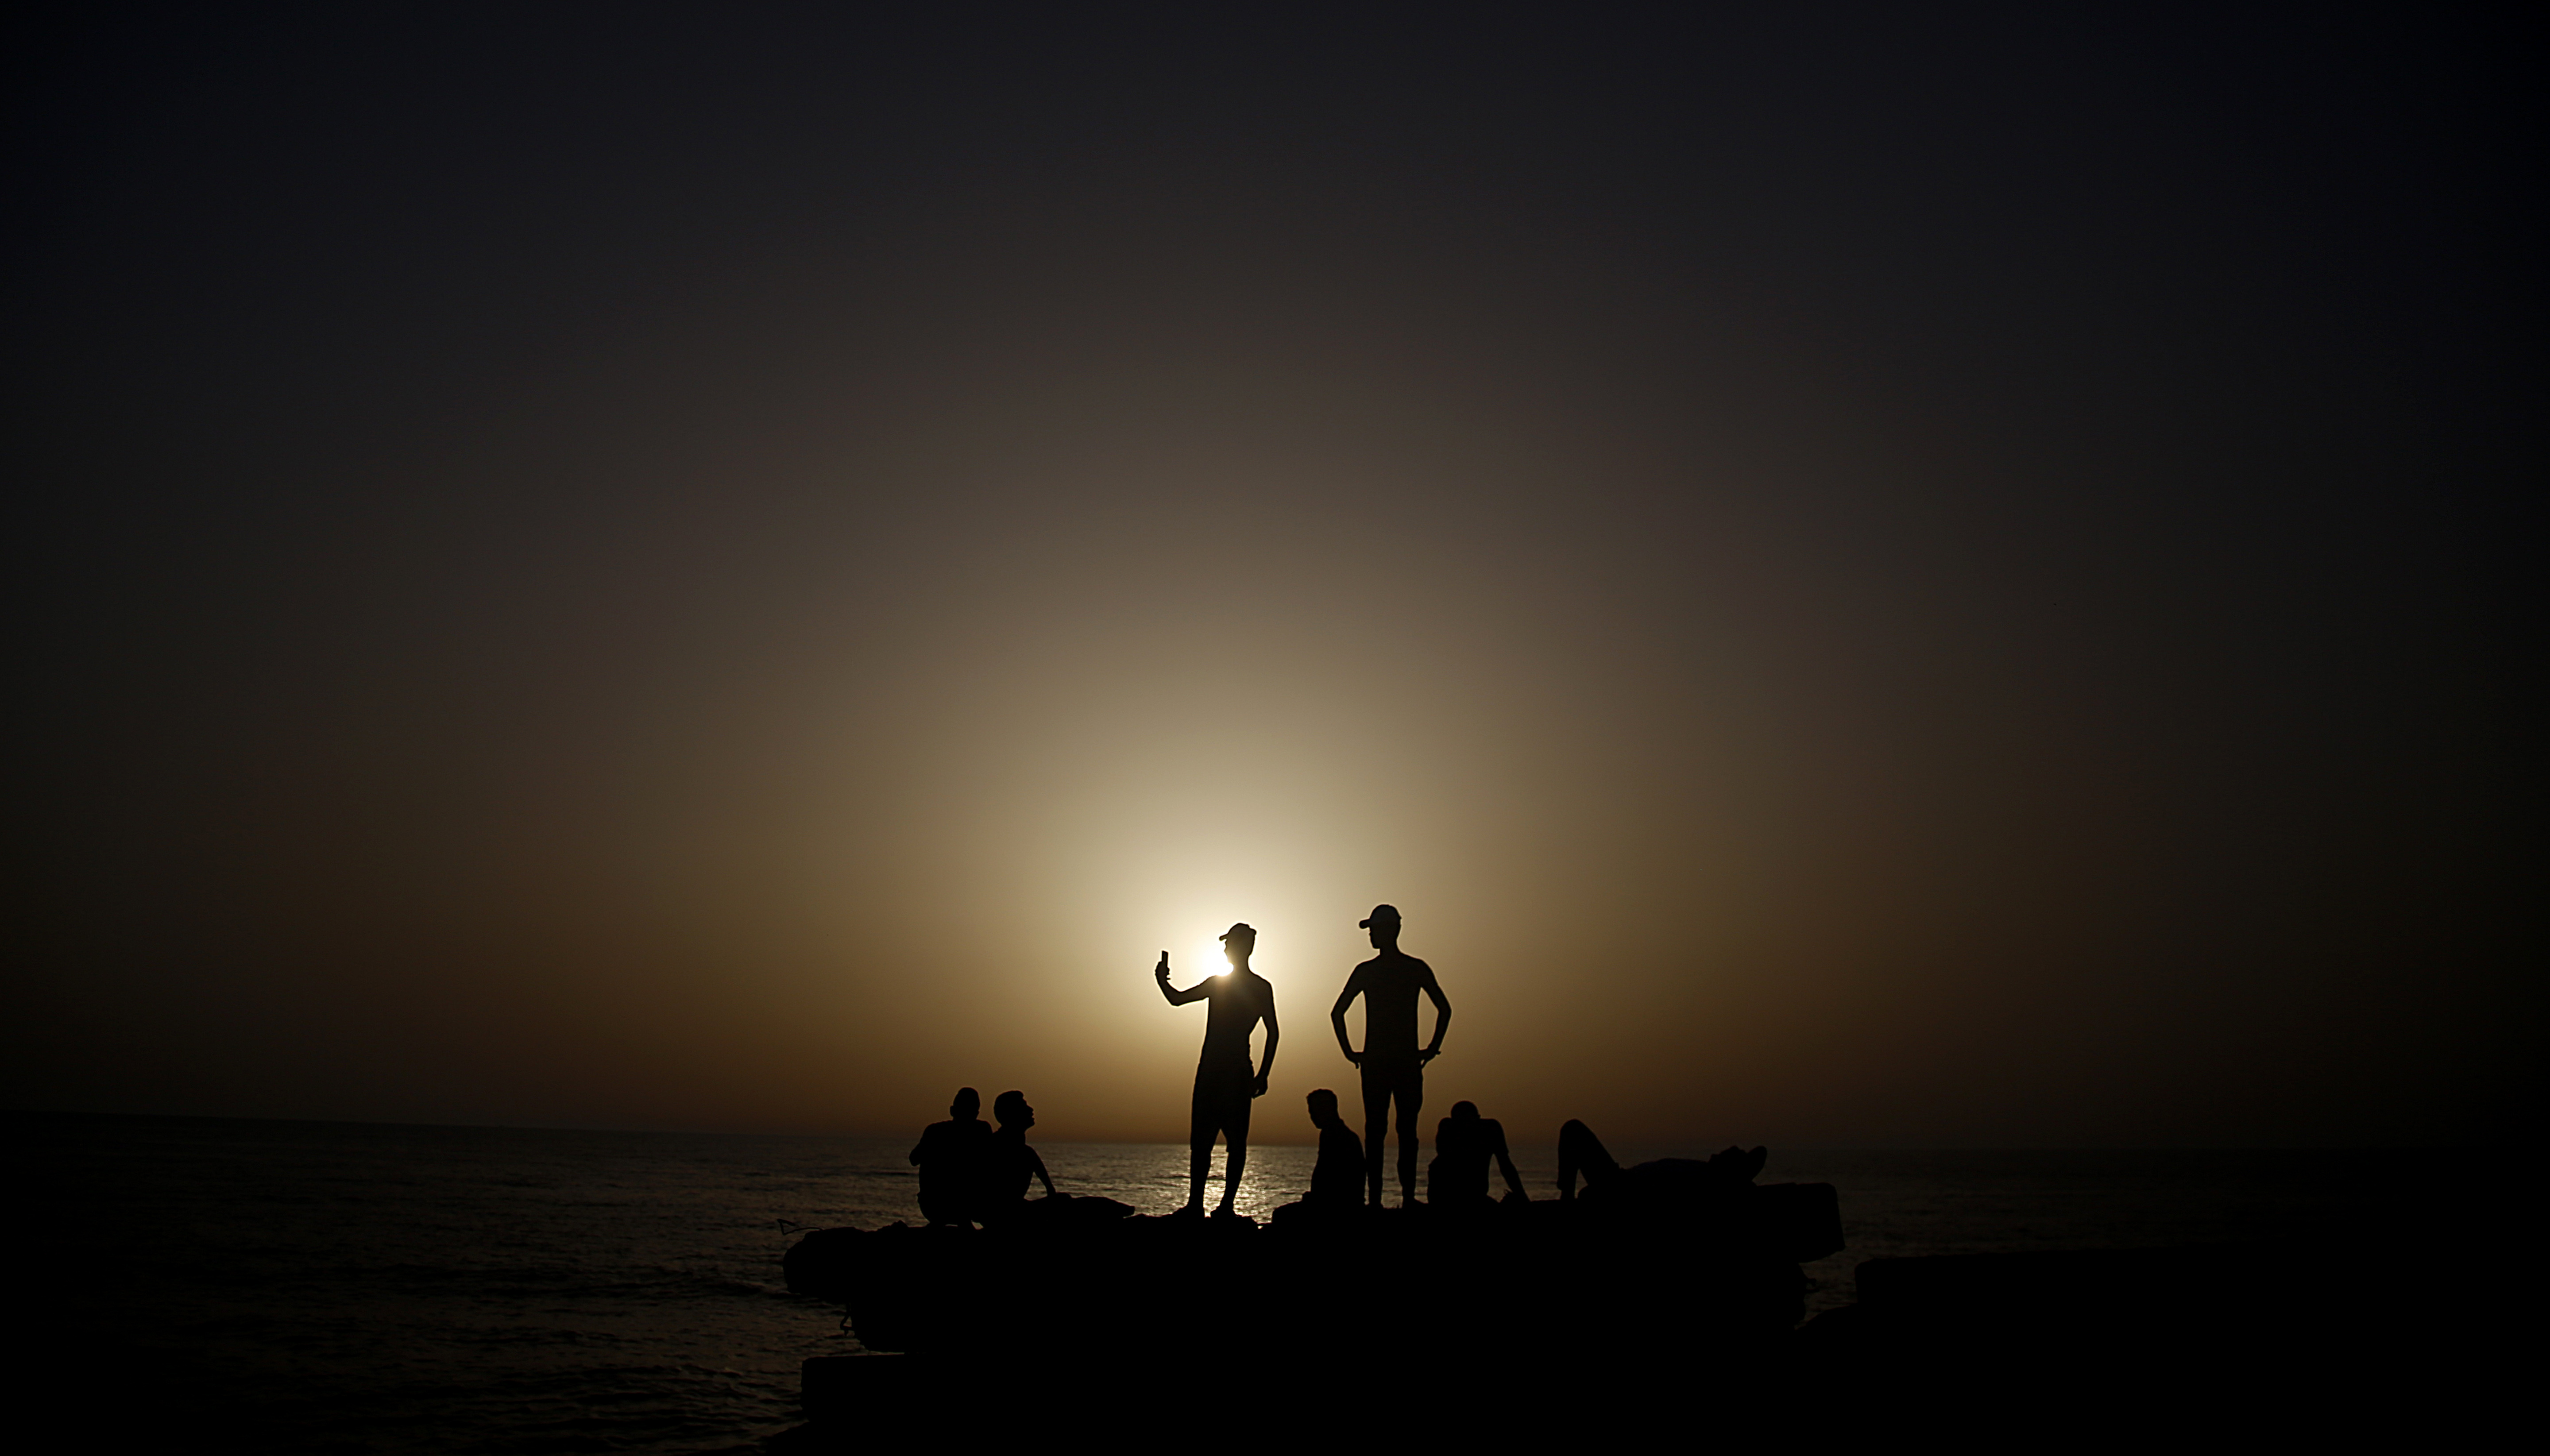 Palestinian men take pictures during sunset at the Gaza port, in Gaza City, Sunday, June 21, 2020. The beach is one of the few open public spaces in this densely populated city. (AP Photo/Hatem Moussa)